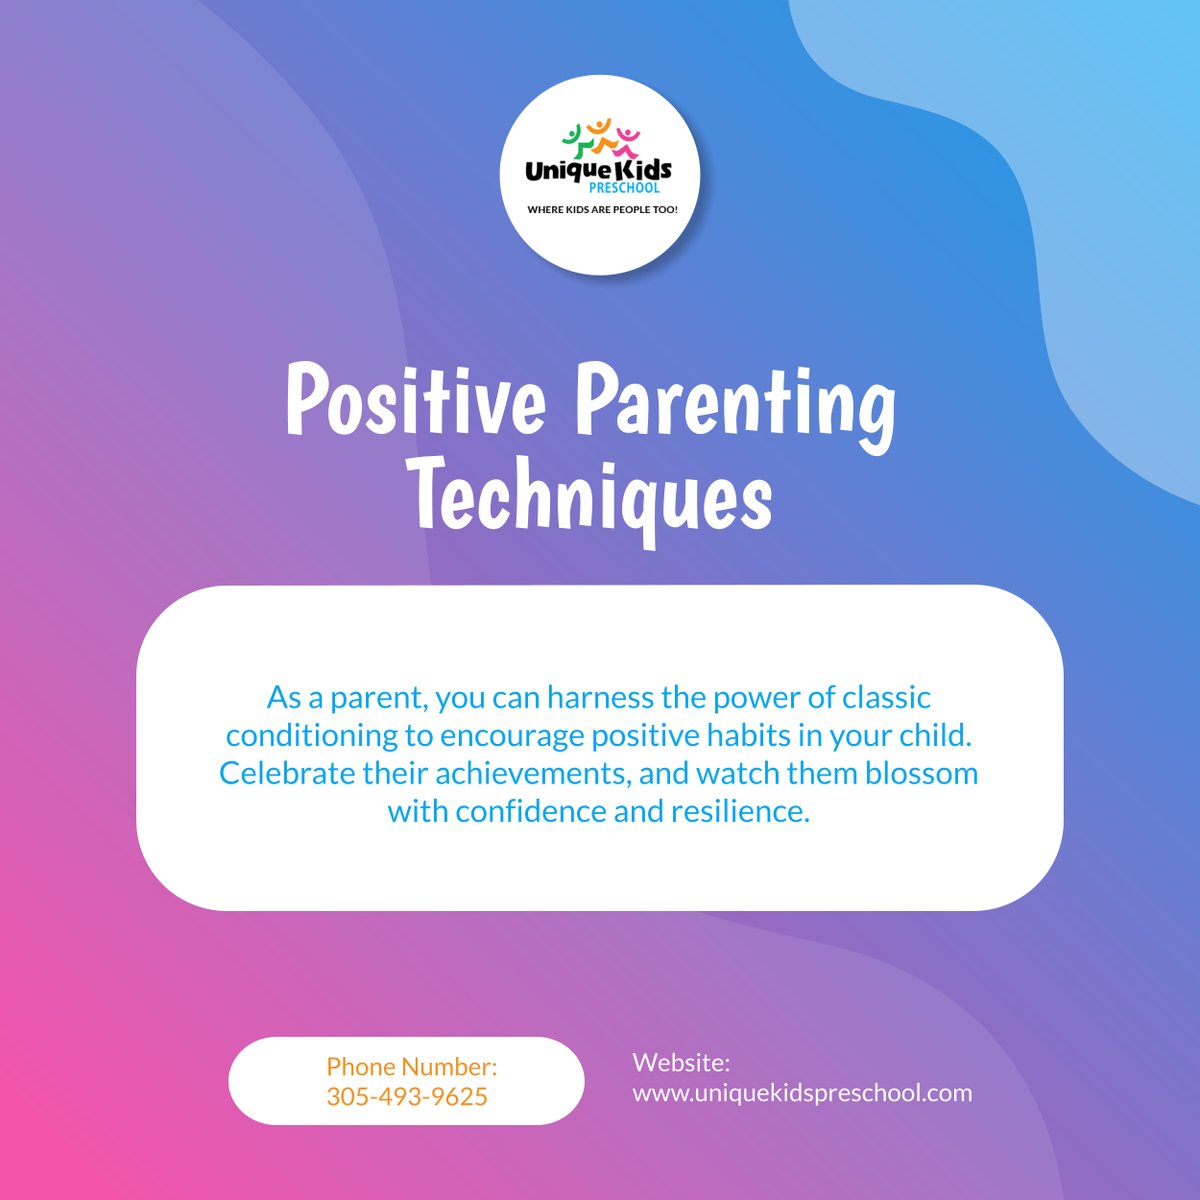 Classic conditioning is more than just a theory—it's a powerful tool in shaping behavior. Create positive associations by celebrating small wins with your child. Reinforce good behavior for them to flourish!  

#Children #Preschool #MiamiGardensFL #ChildCare #ParentingTechniques